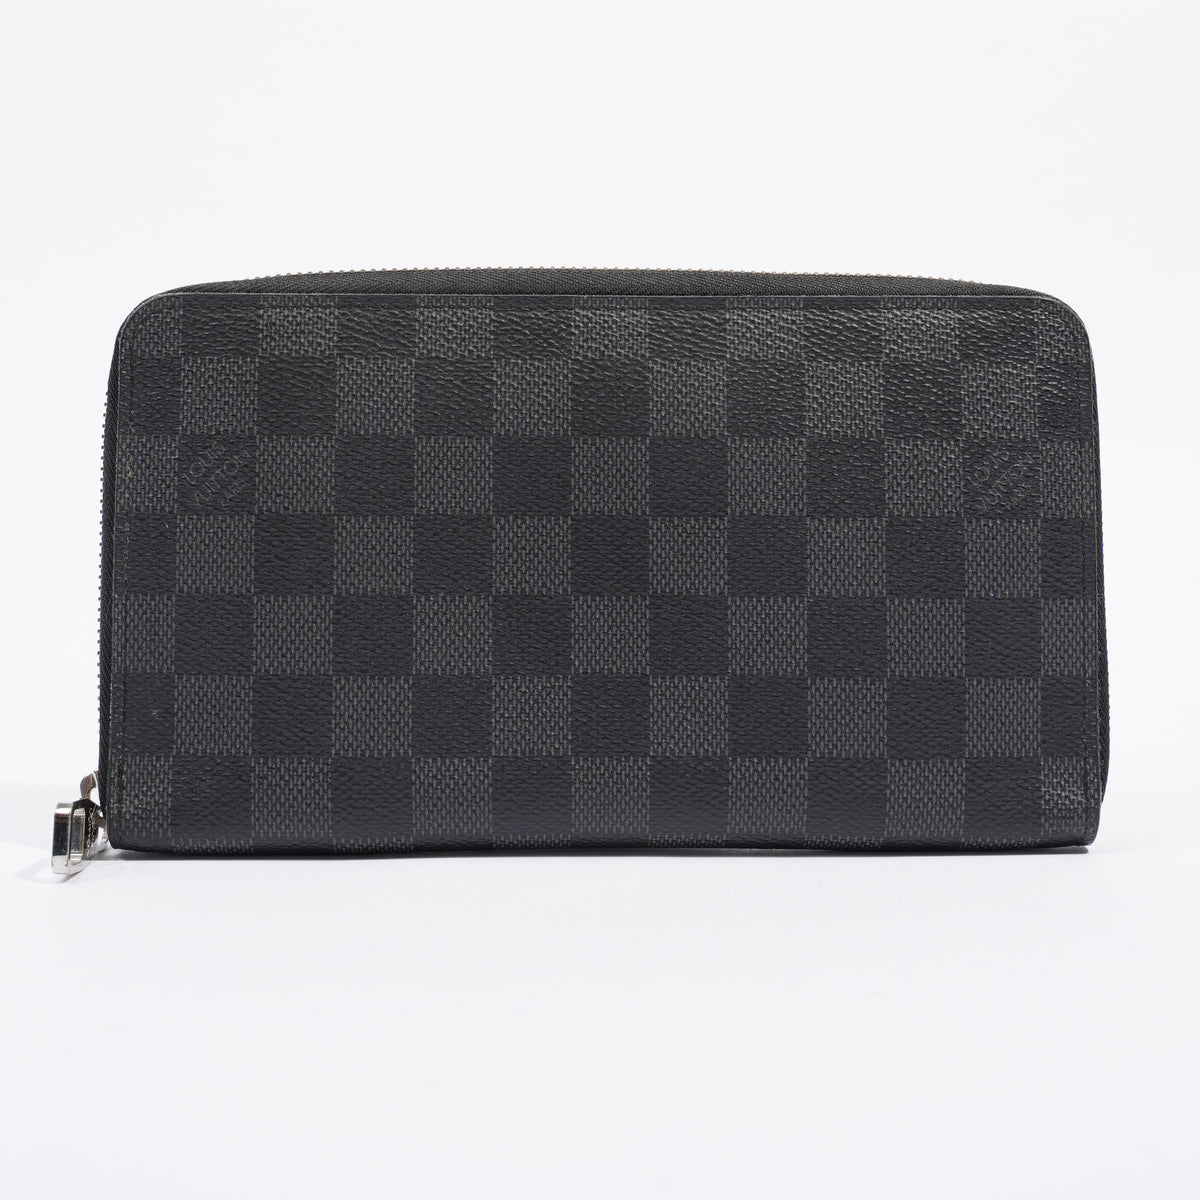 Zippy Organiser Damier Graphite Canvas - Wallets and Small Leather